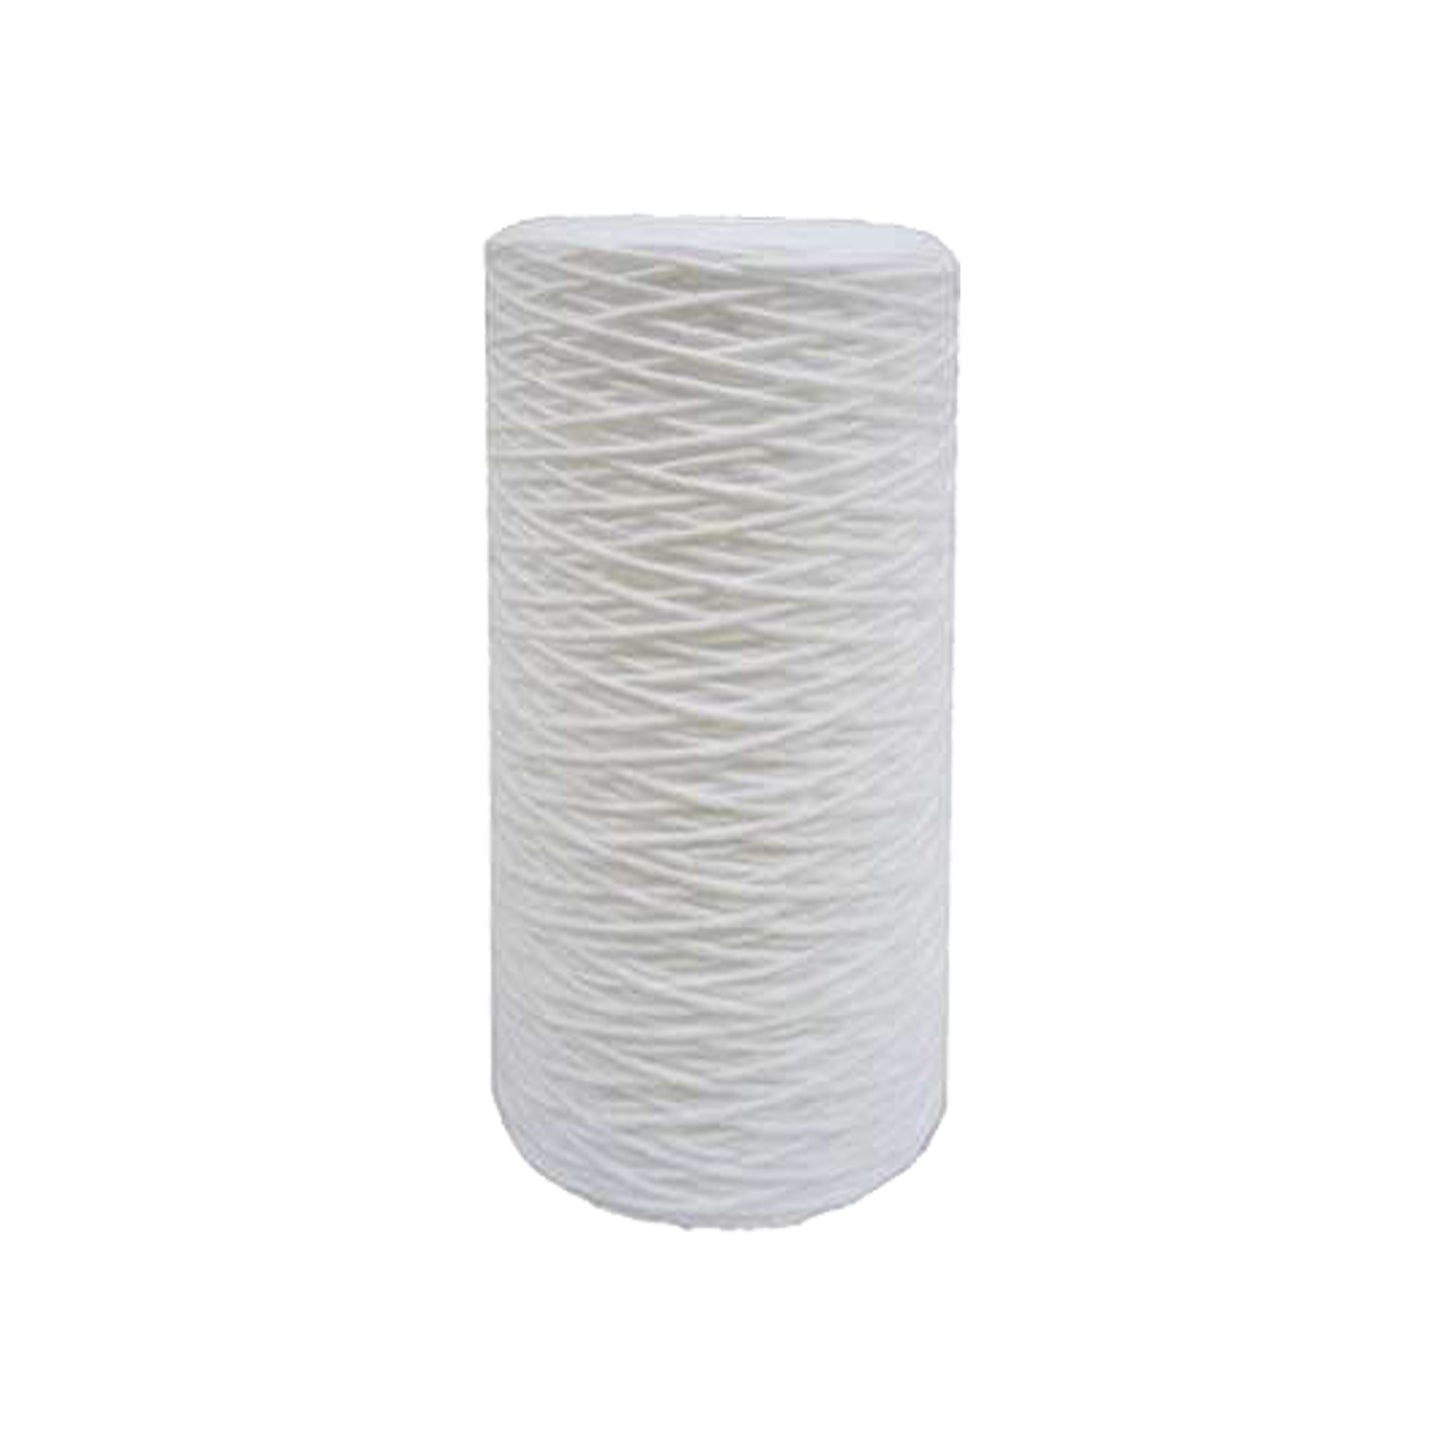 SWC-45-1030 Hydronix Comparable String Wound Sediment Water Filter (30 micron) by Tier1